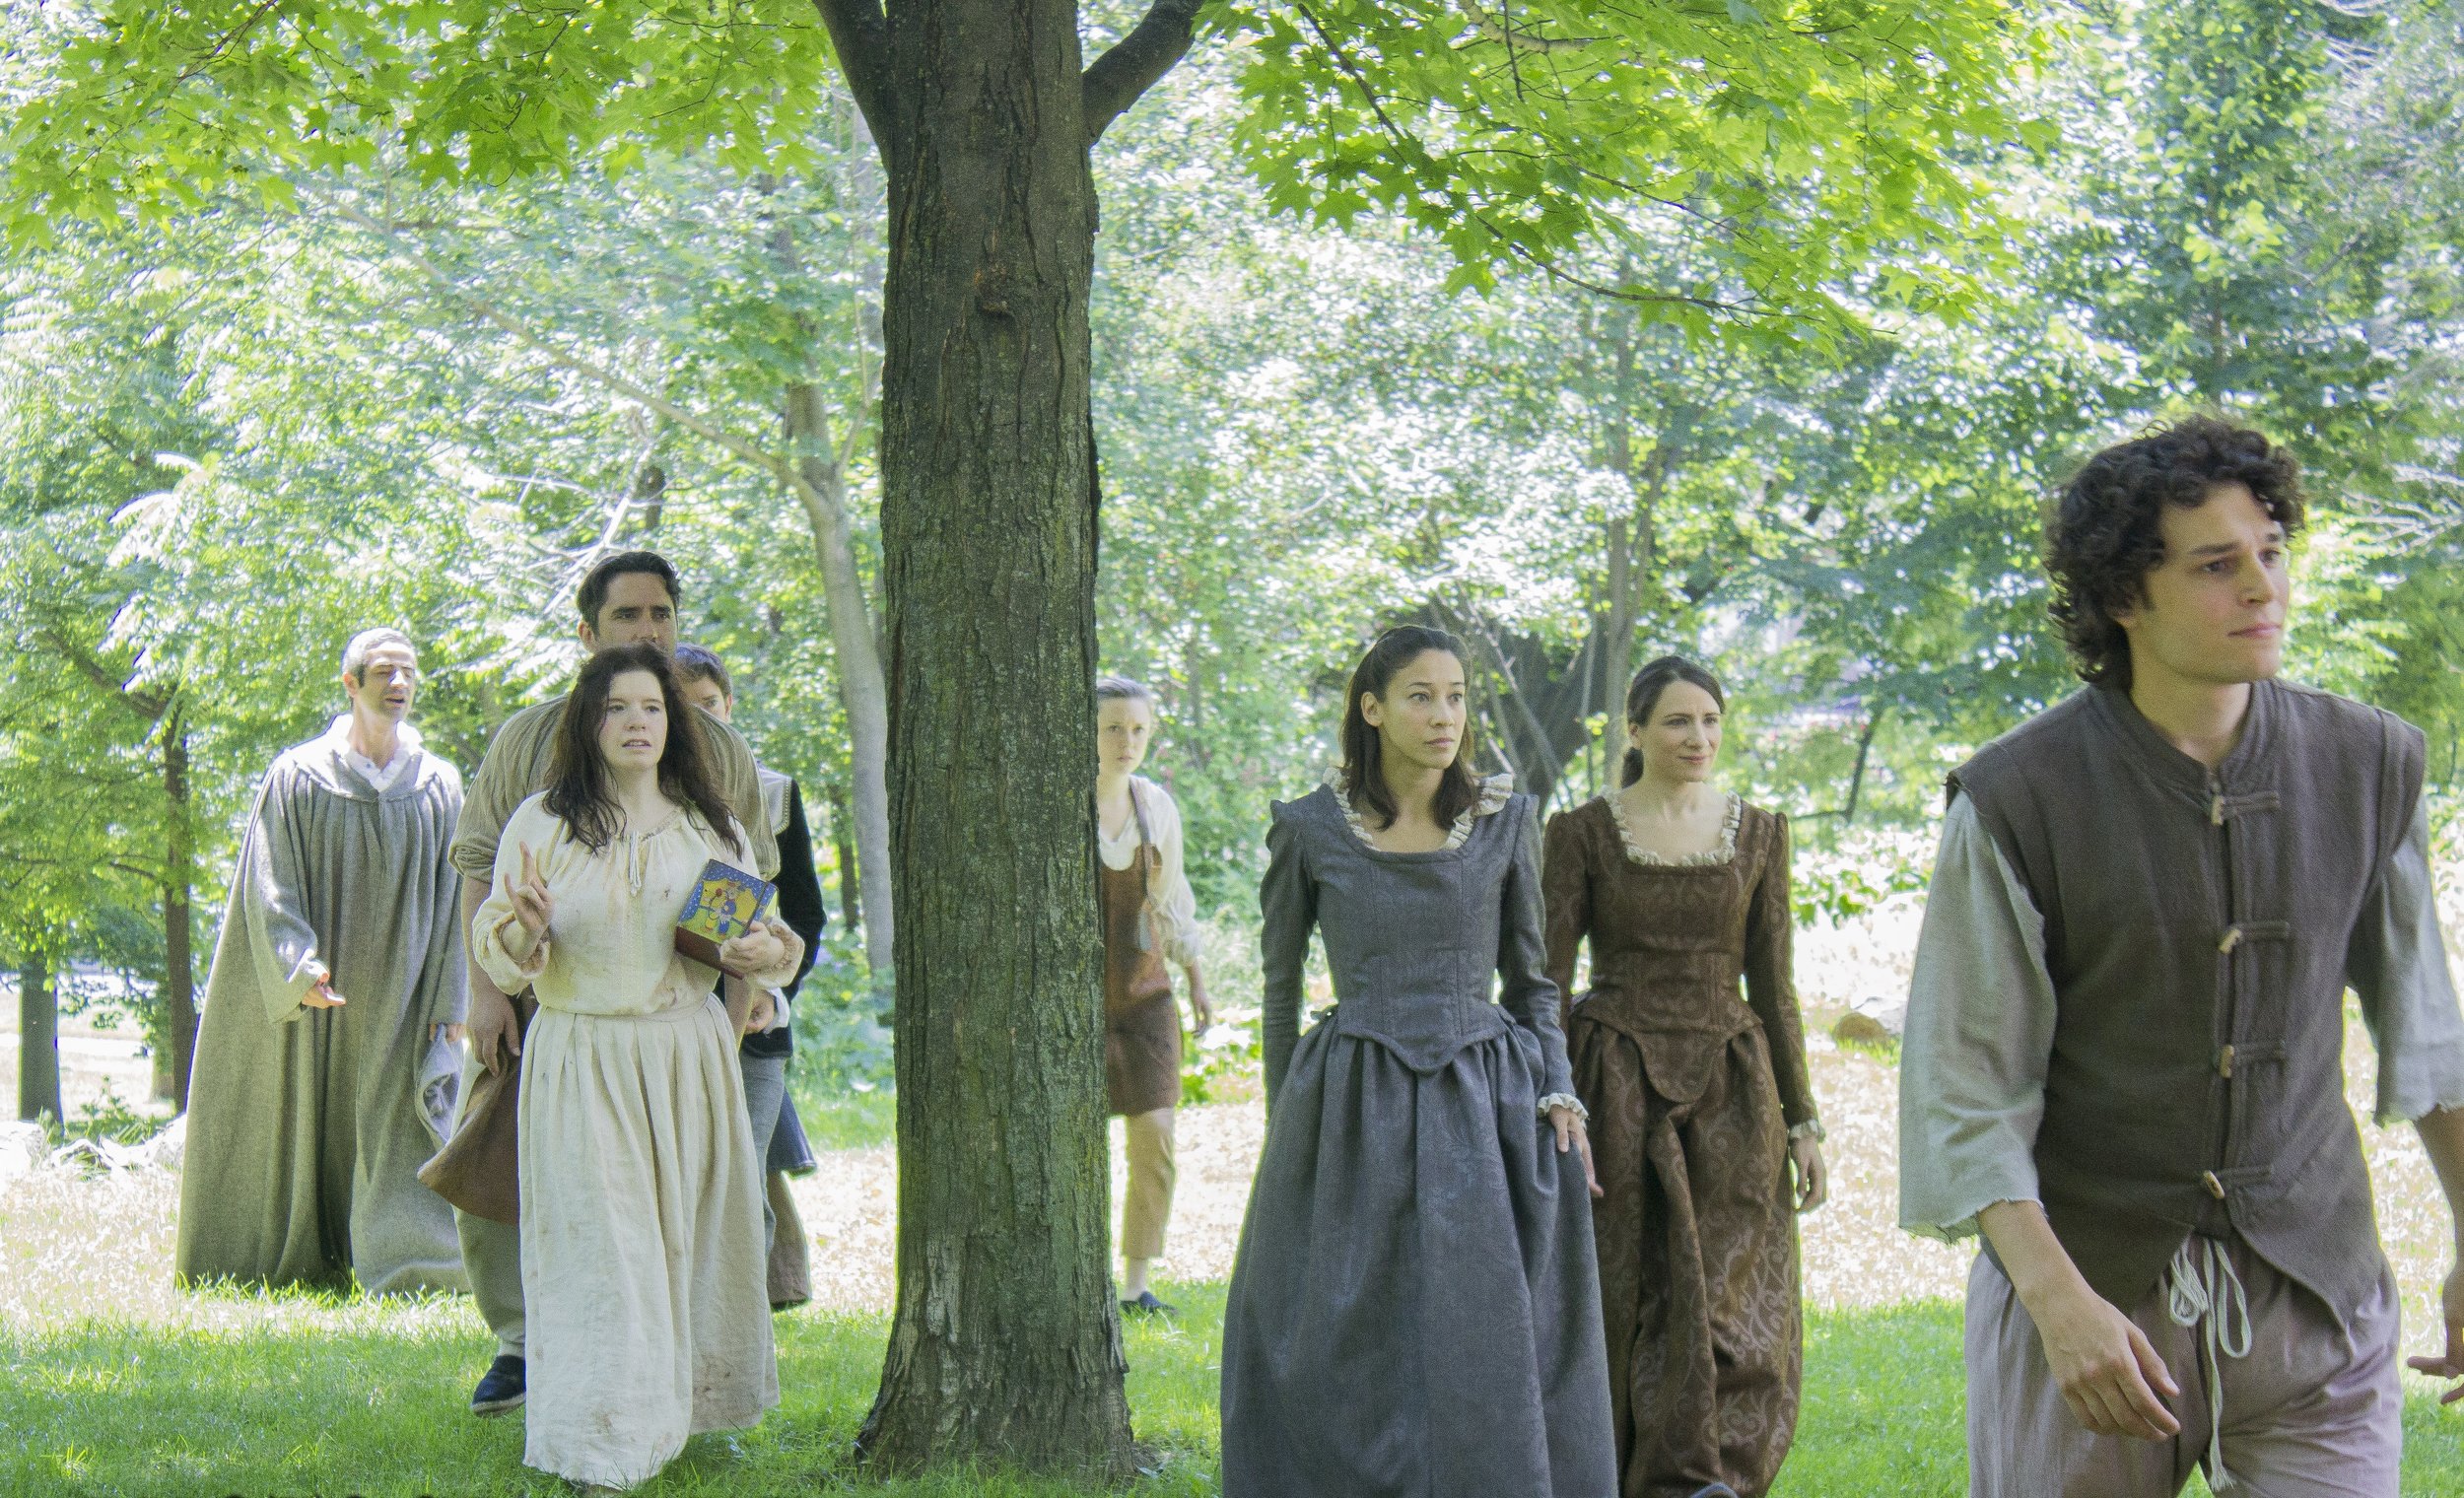  Members of the Passion Play Cast entering Withrow Park: (L-R) Sam Kalilieh, Jordan Pettle, Thrasso Petras, Amy Keating, Katherine Cullen, Julie Tepperman, Mayko Nguyen, and Andrew Kushnir 